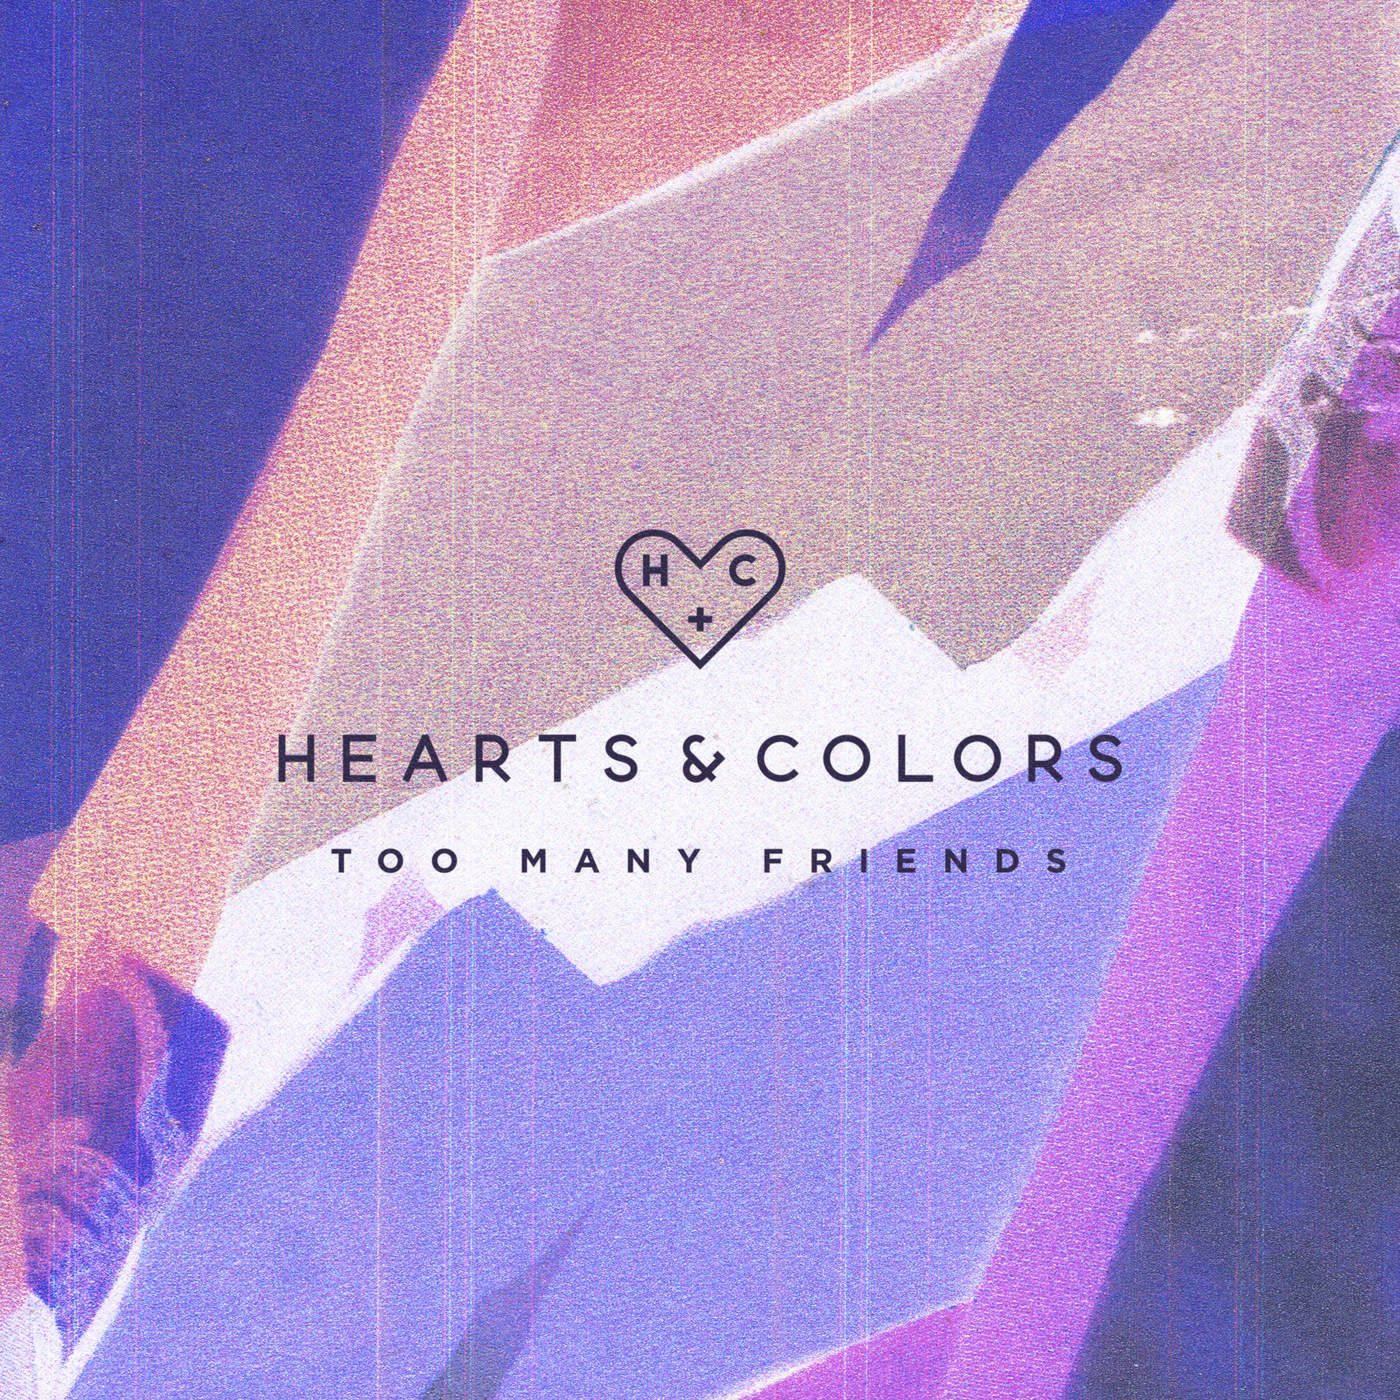 Colors of the Heart. Waterbed Colors Hearts. Песня Colors Hearts. Too many friends Heart. Песня the color of the night